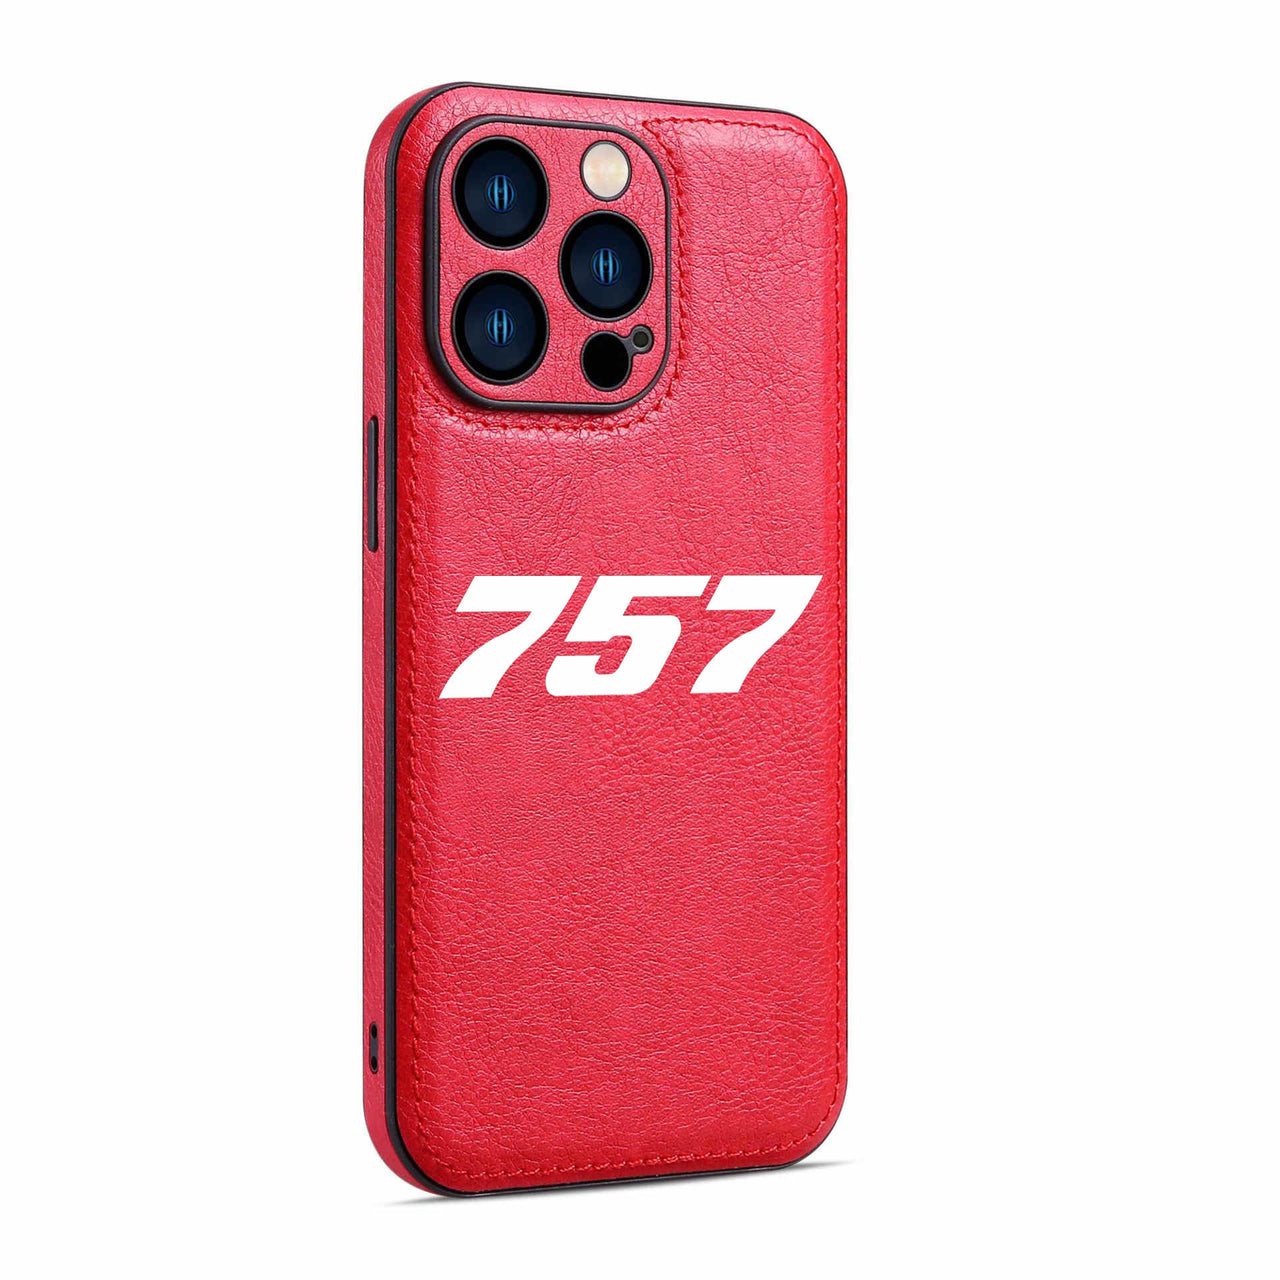 757 Flat Text Designed Leather iPhone Cases